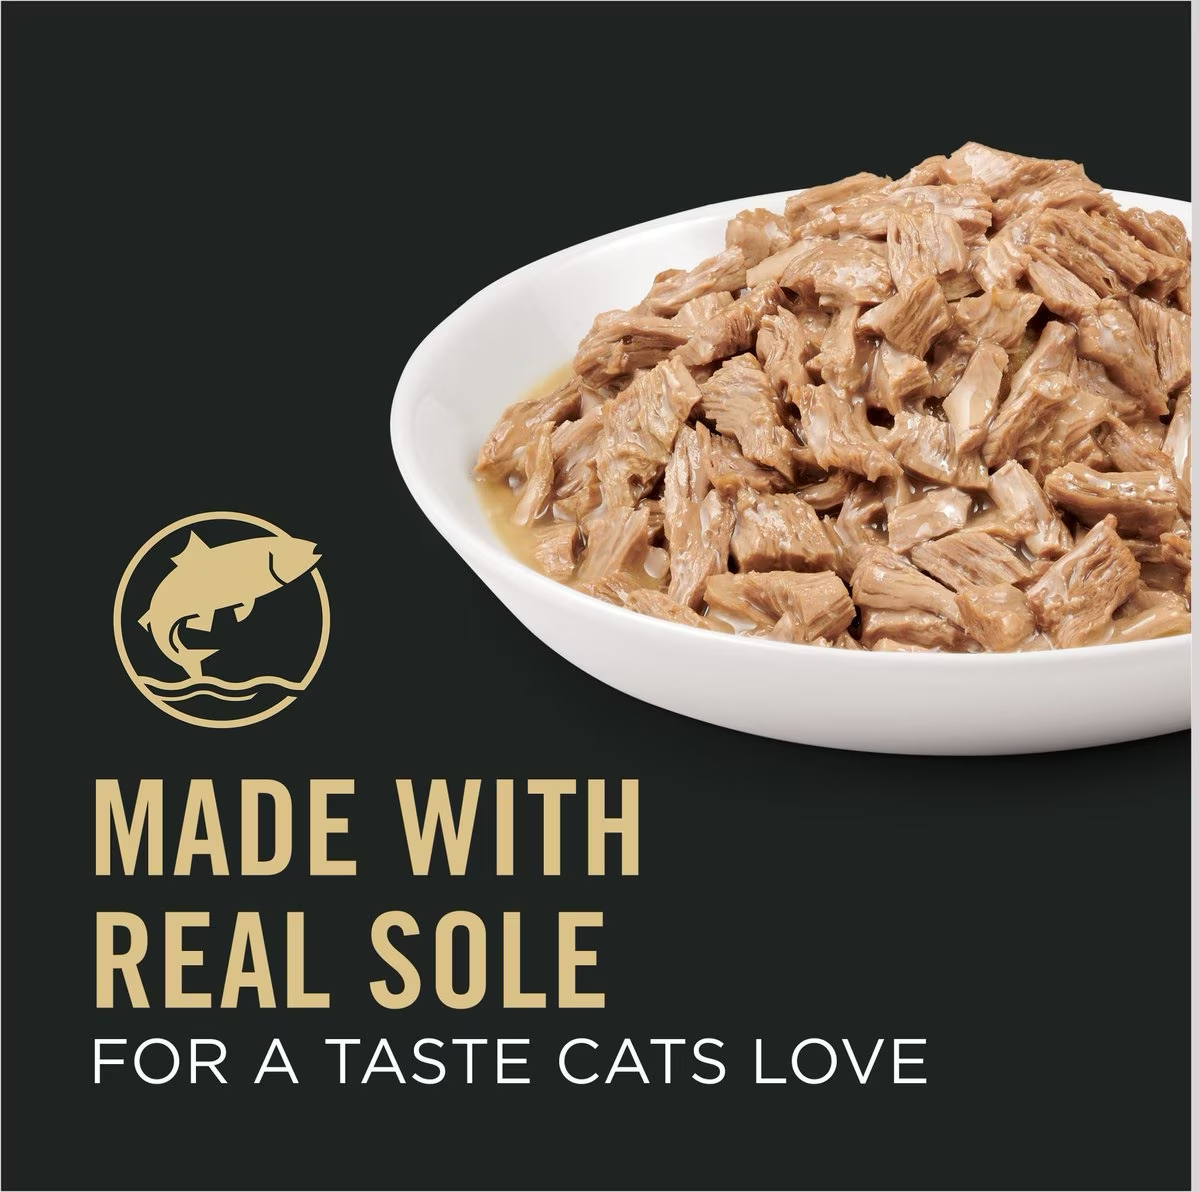 Purina Pro Plan Vital Systems Sole Entree in Wet Cat Food Gravy  Canned Cat Food  | PetMax Canada